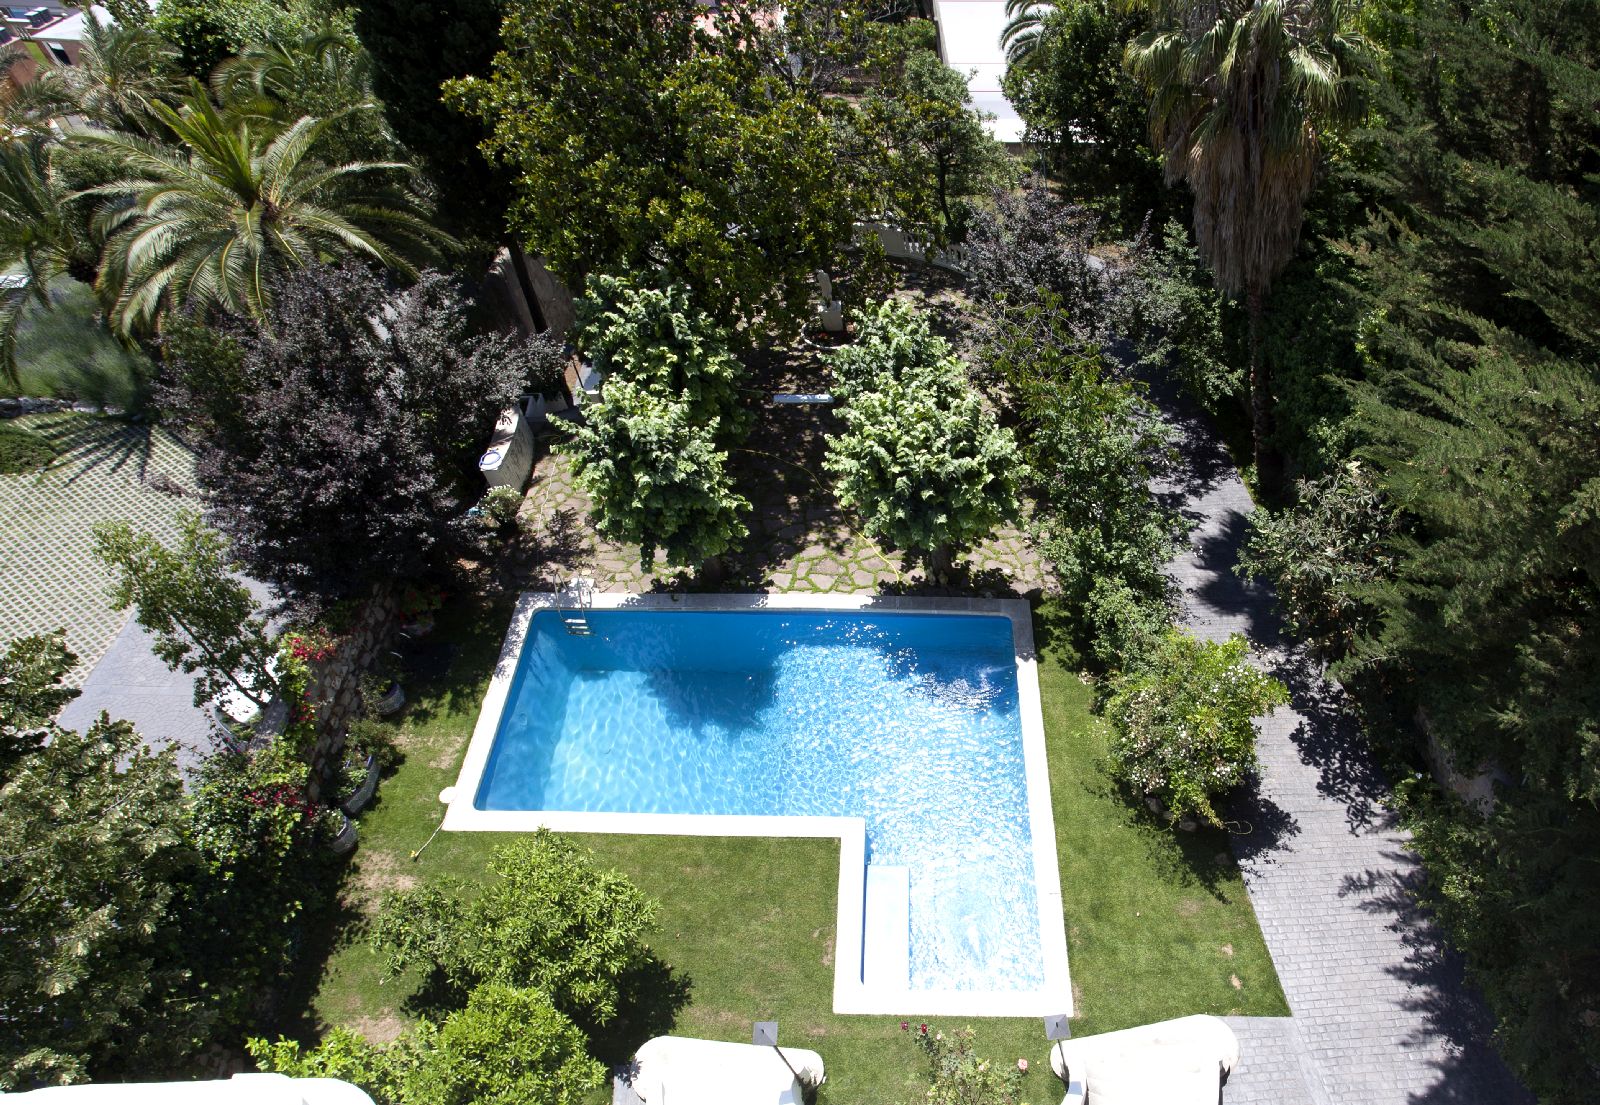 View of the pool from above